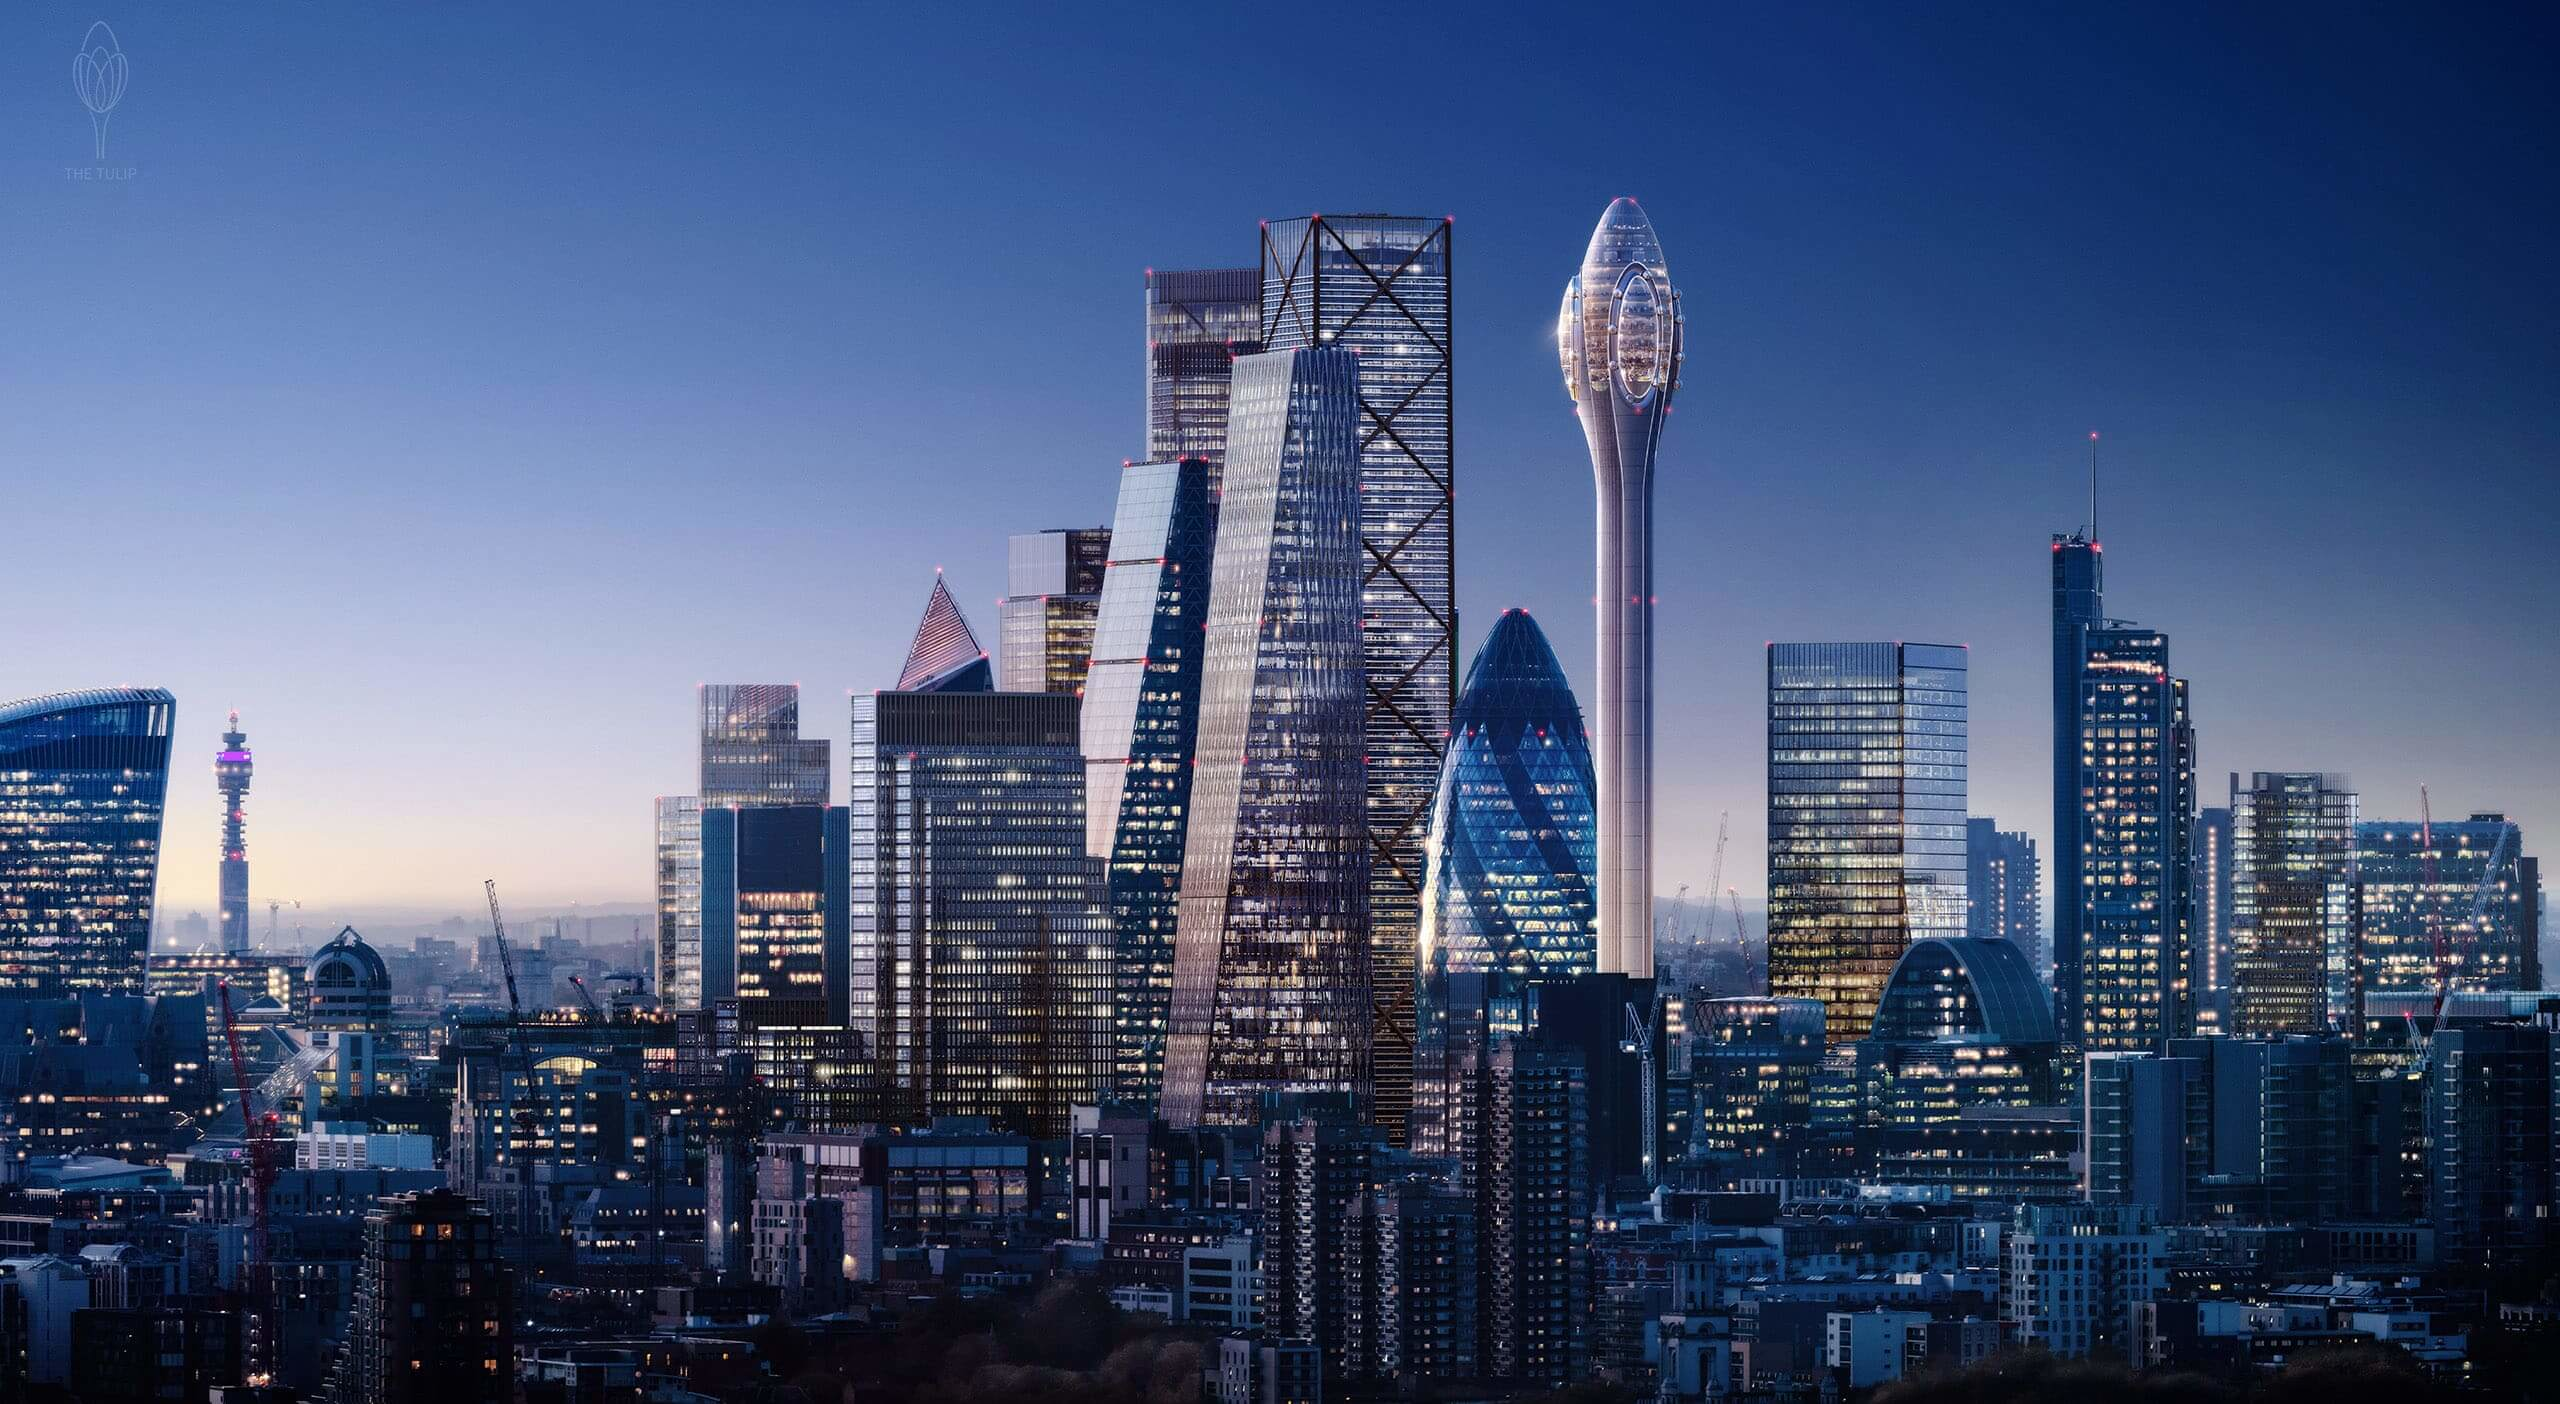 The London skyline controversy